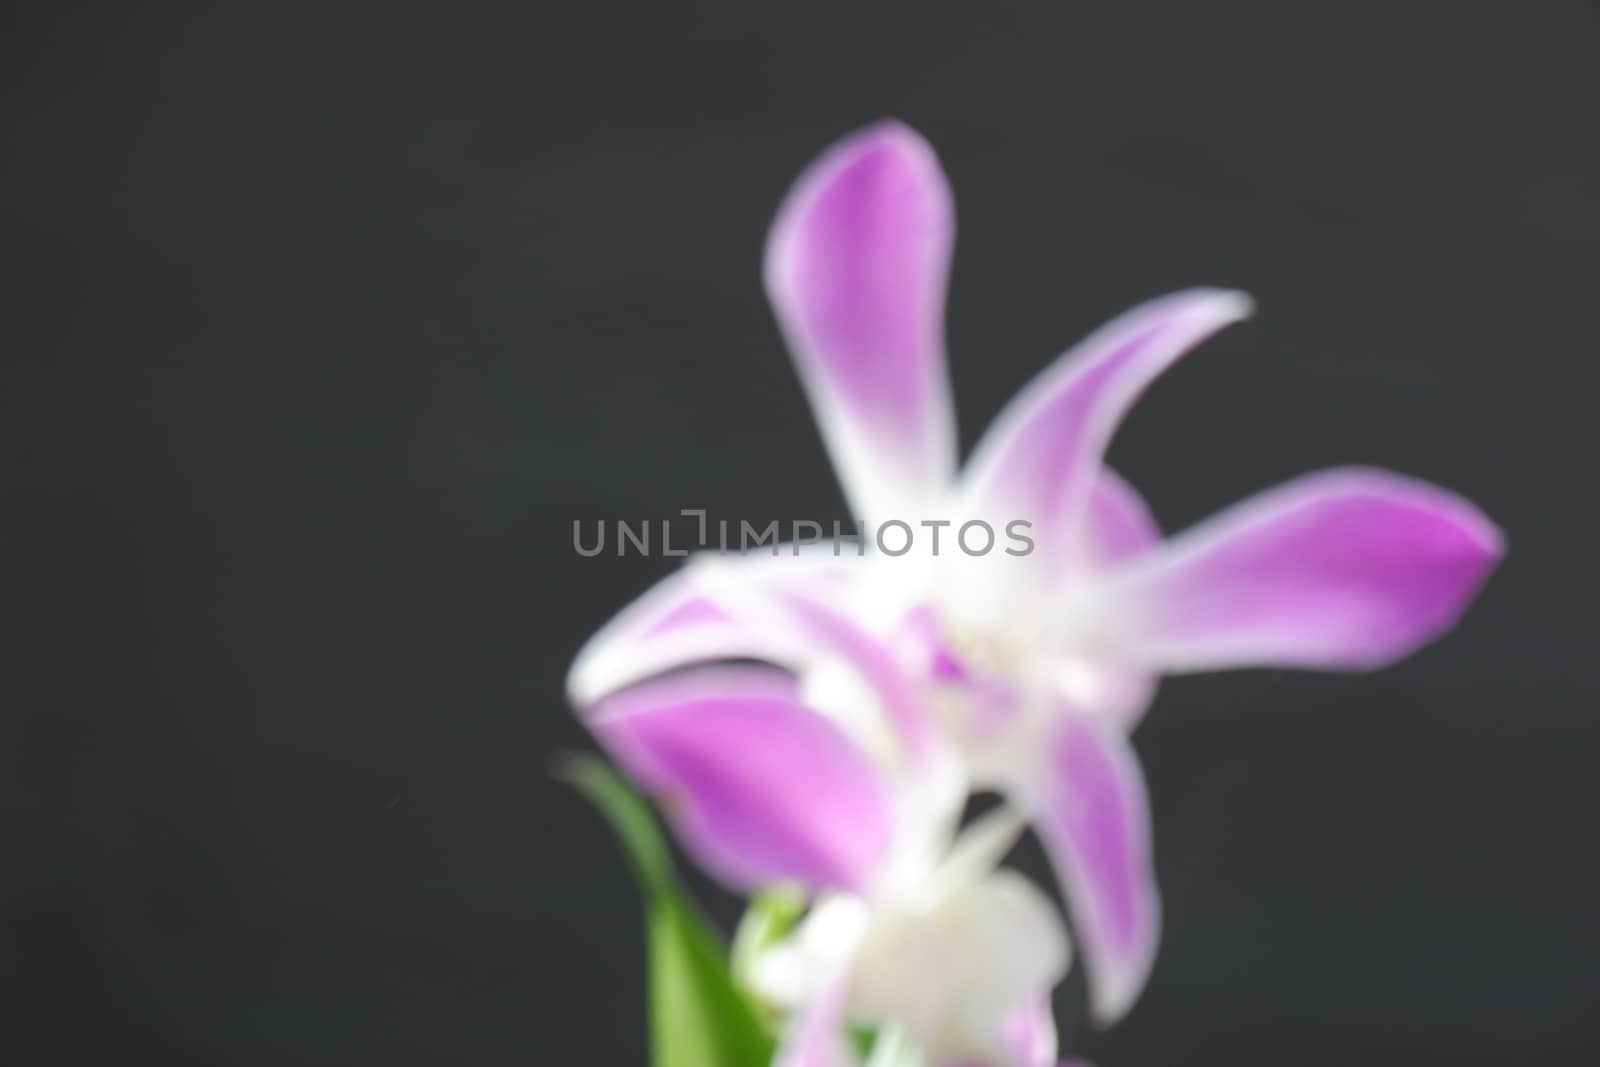 beautiful dendrobium orchid, a combination of bright white and purple by pengejarsenja